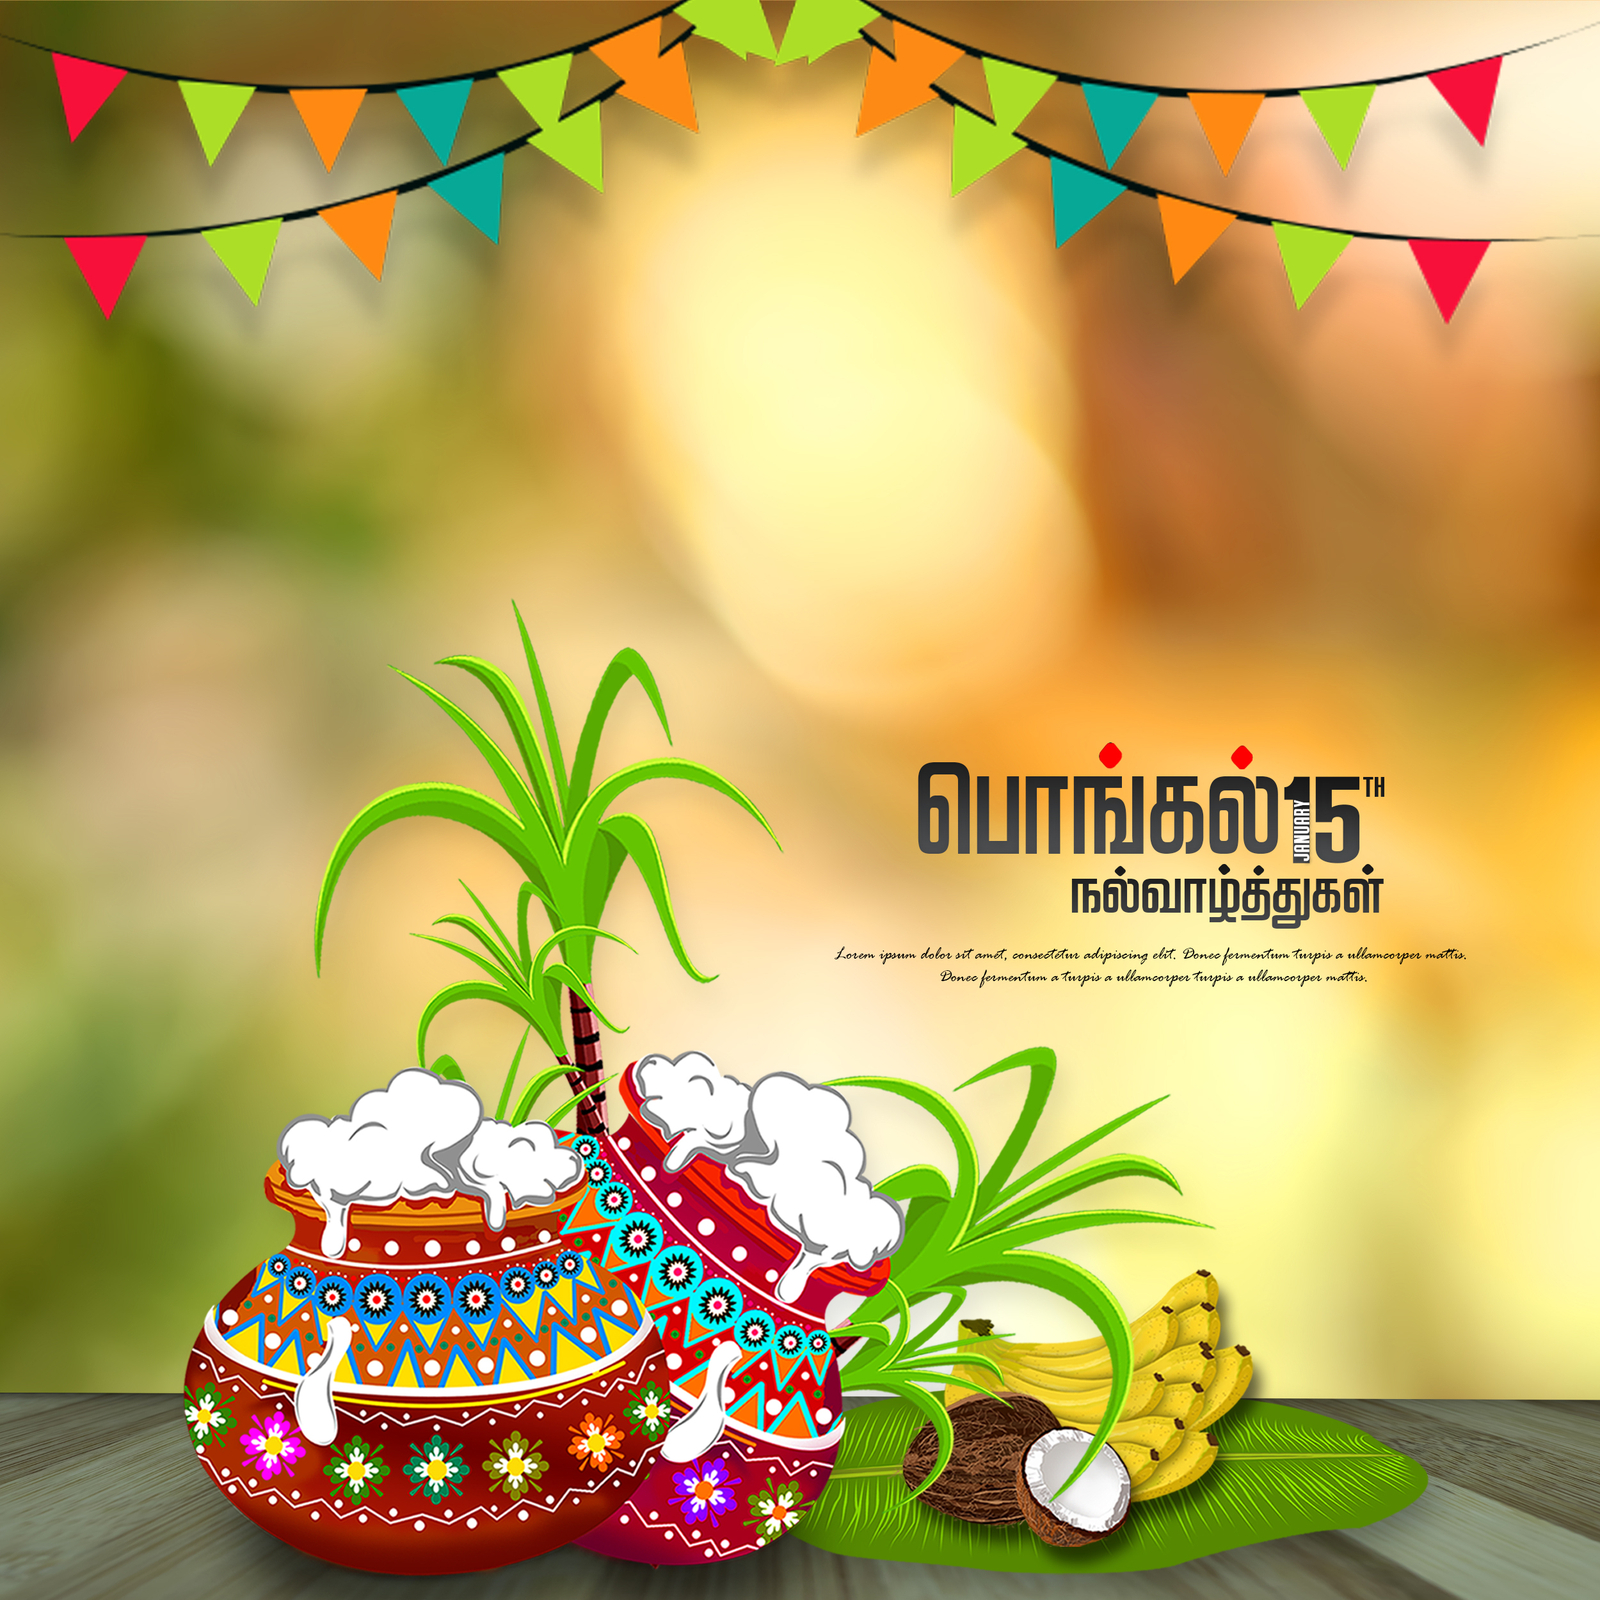 PONGAL WISHES 2024 IN TAMIL | பொங்கல் வாழ்த்துக்கள் 2024